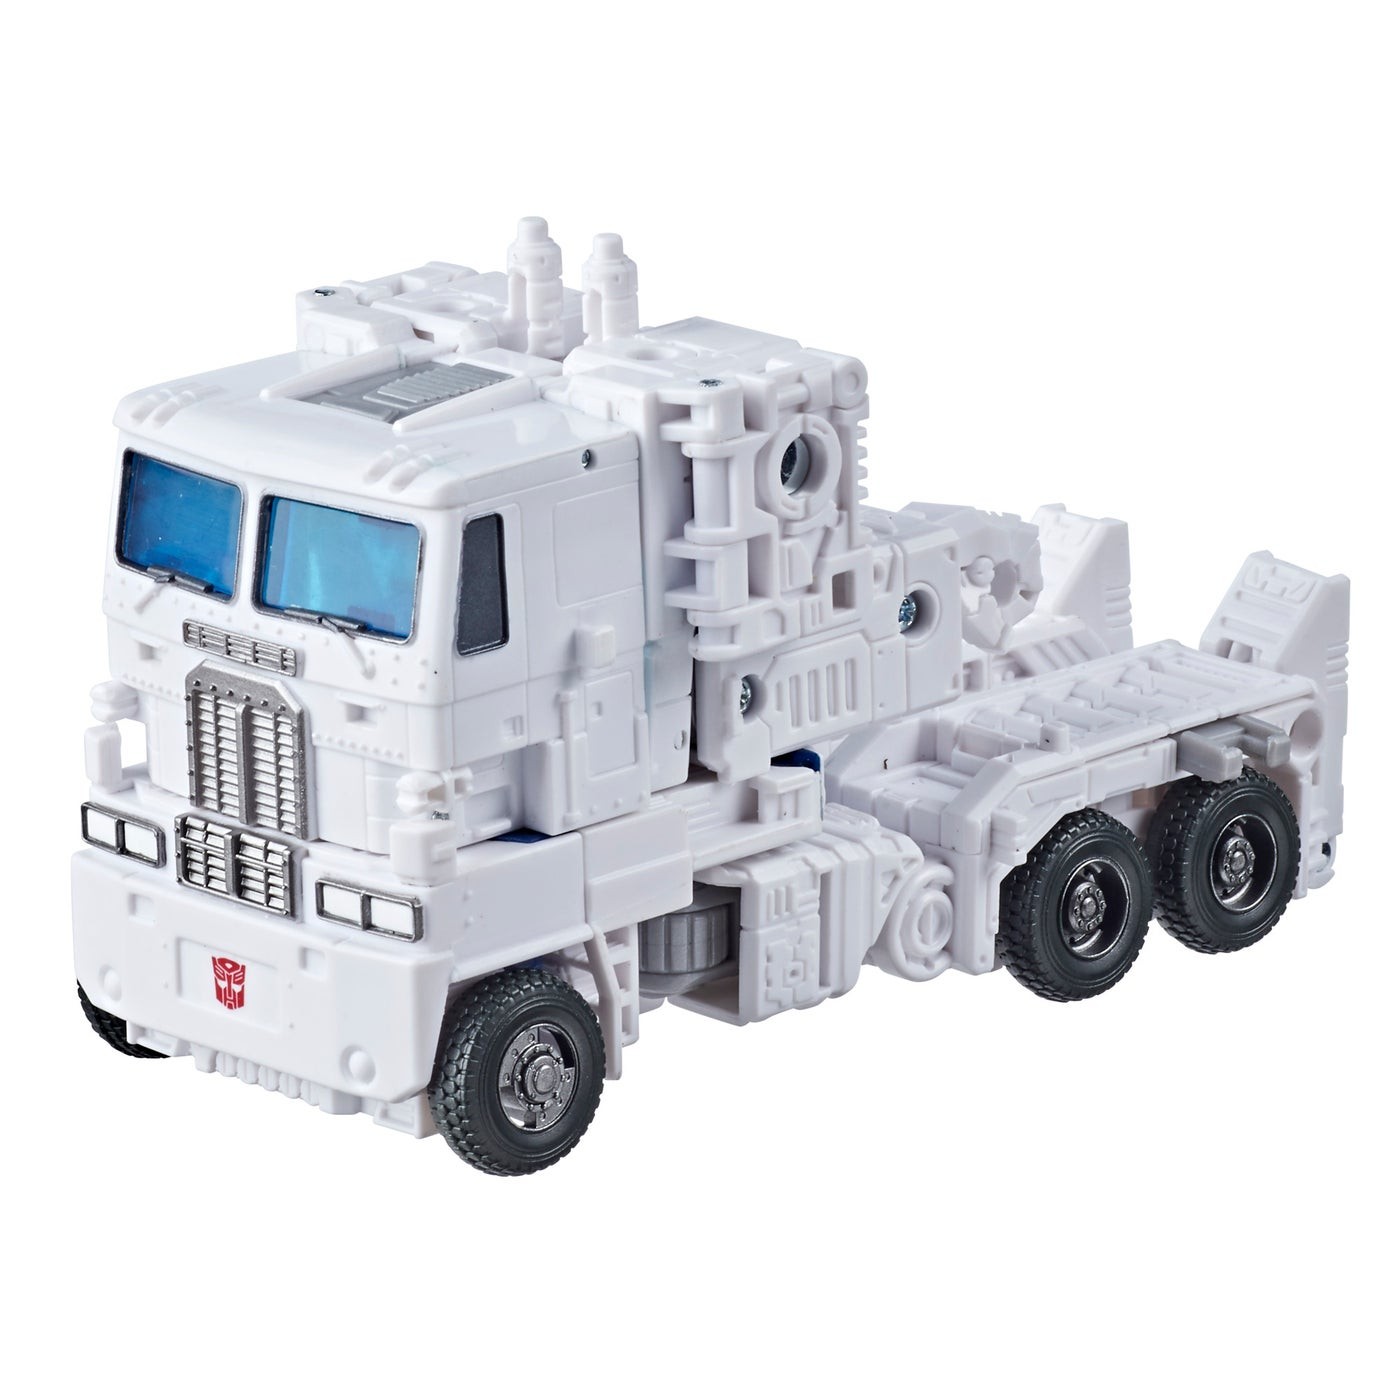 Transformers News: Kingdom Dinobot, Airazor and Ultra Magnus officially revealed